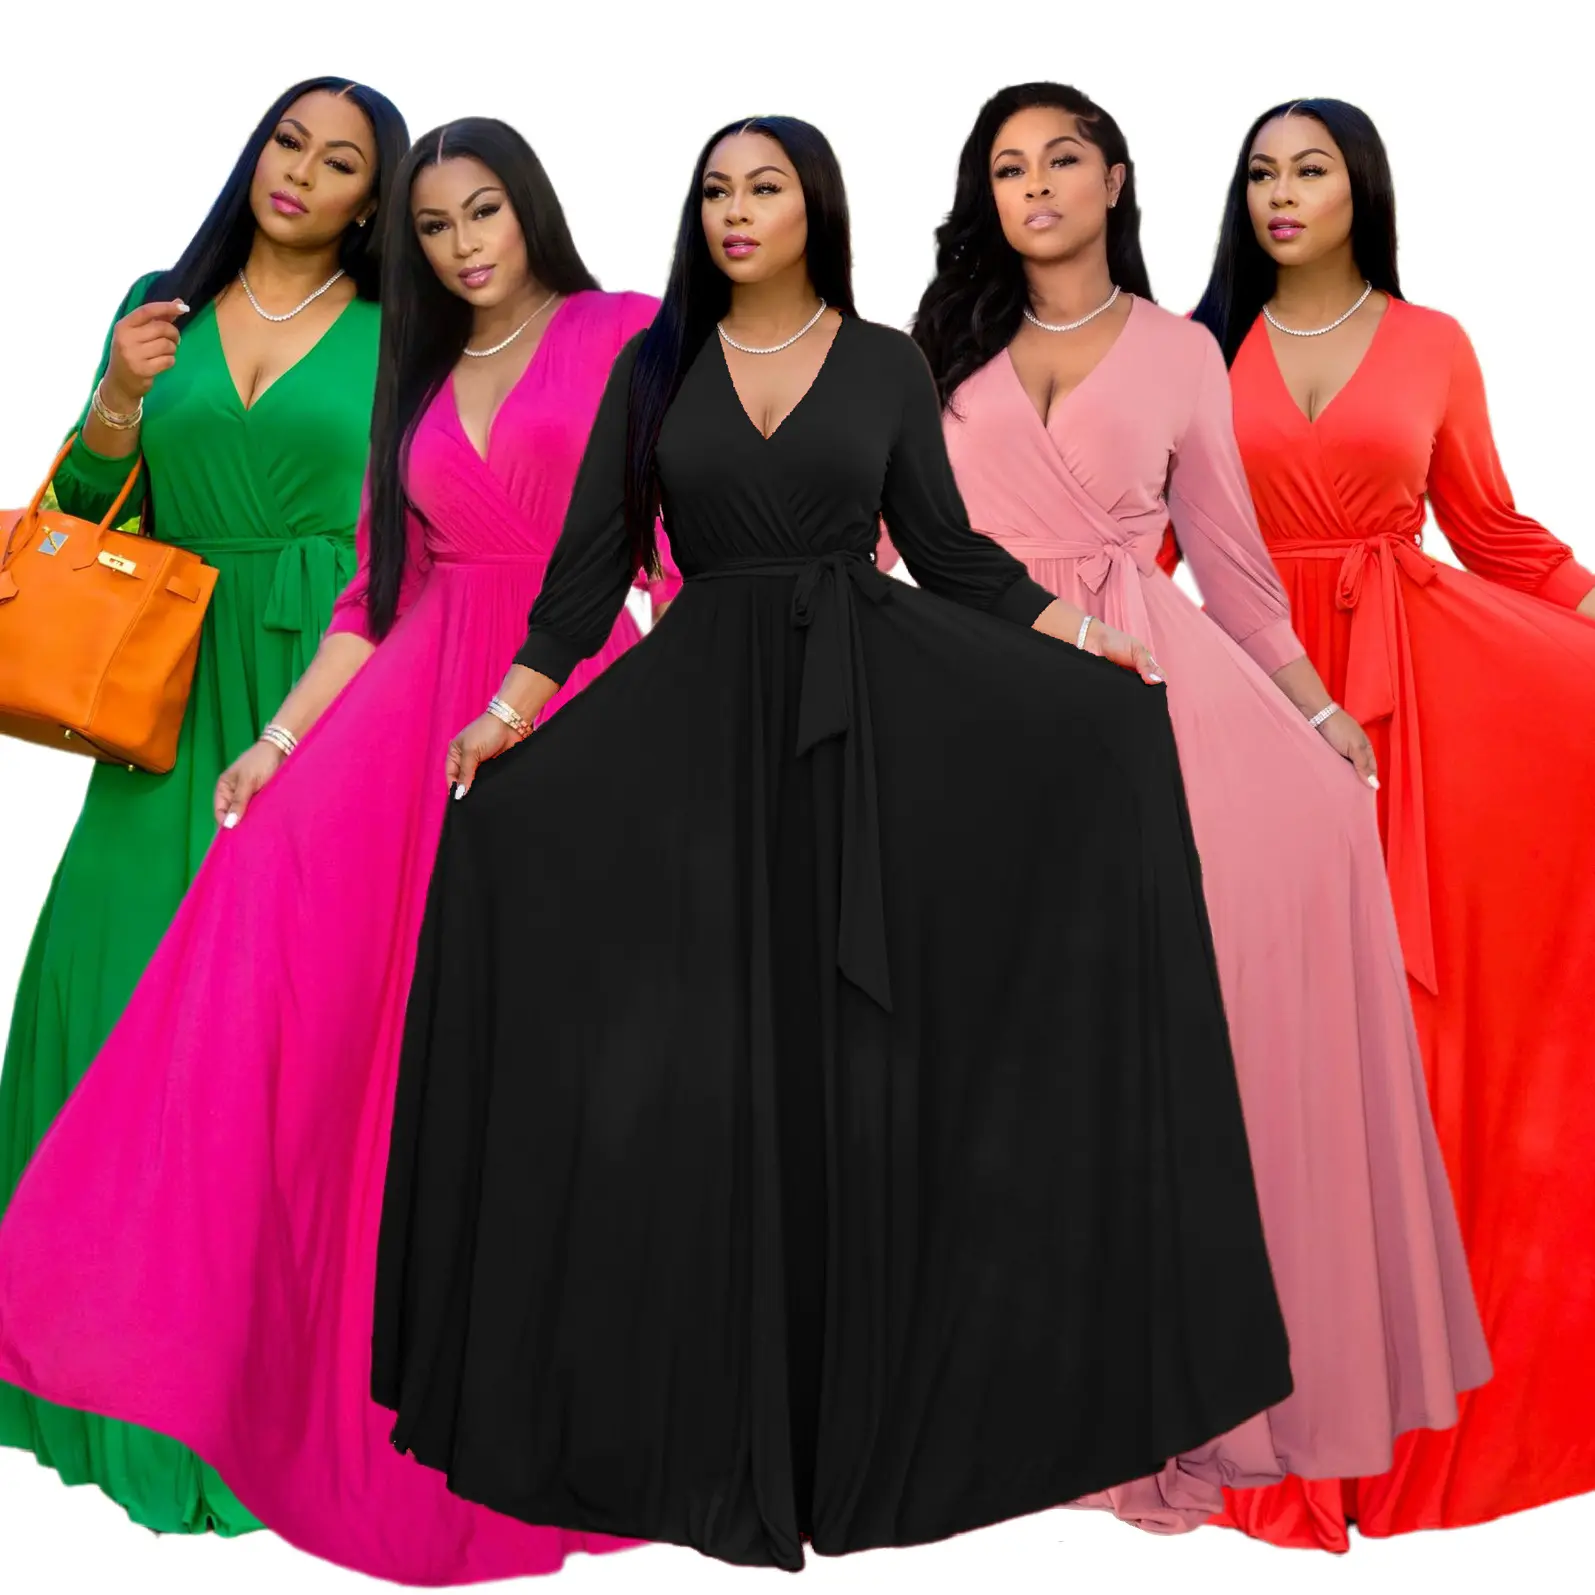 New Fashion Women Long Sleeve Dress V-neck Lady Elegant A-line Lace Up Waist Solid Color Muslim Casual Floor Long Maxi Dress